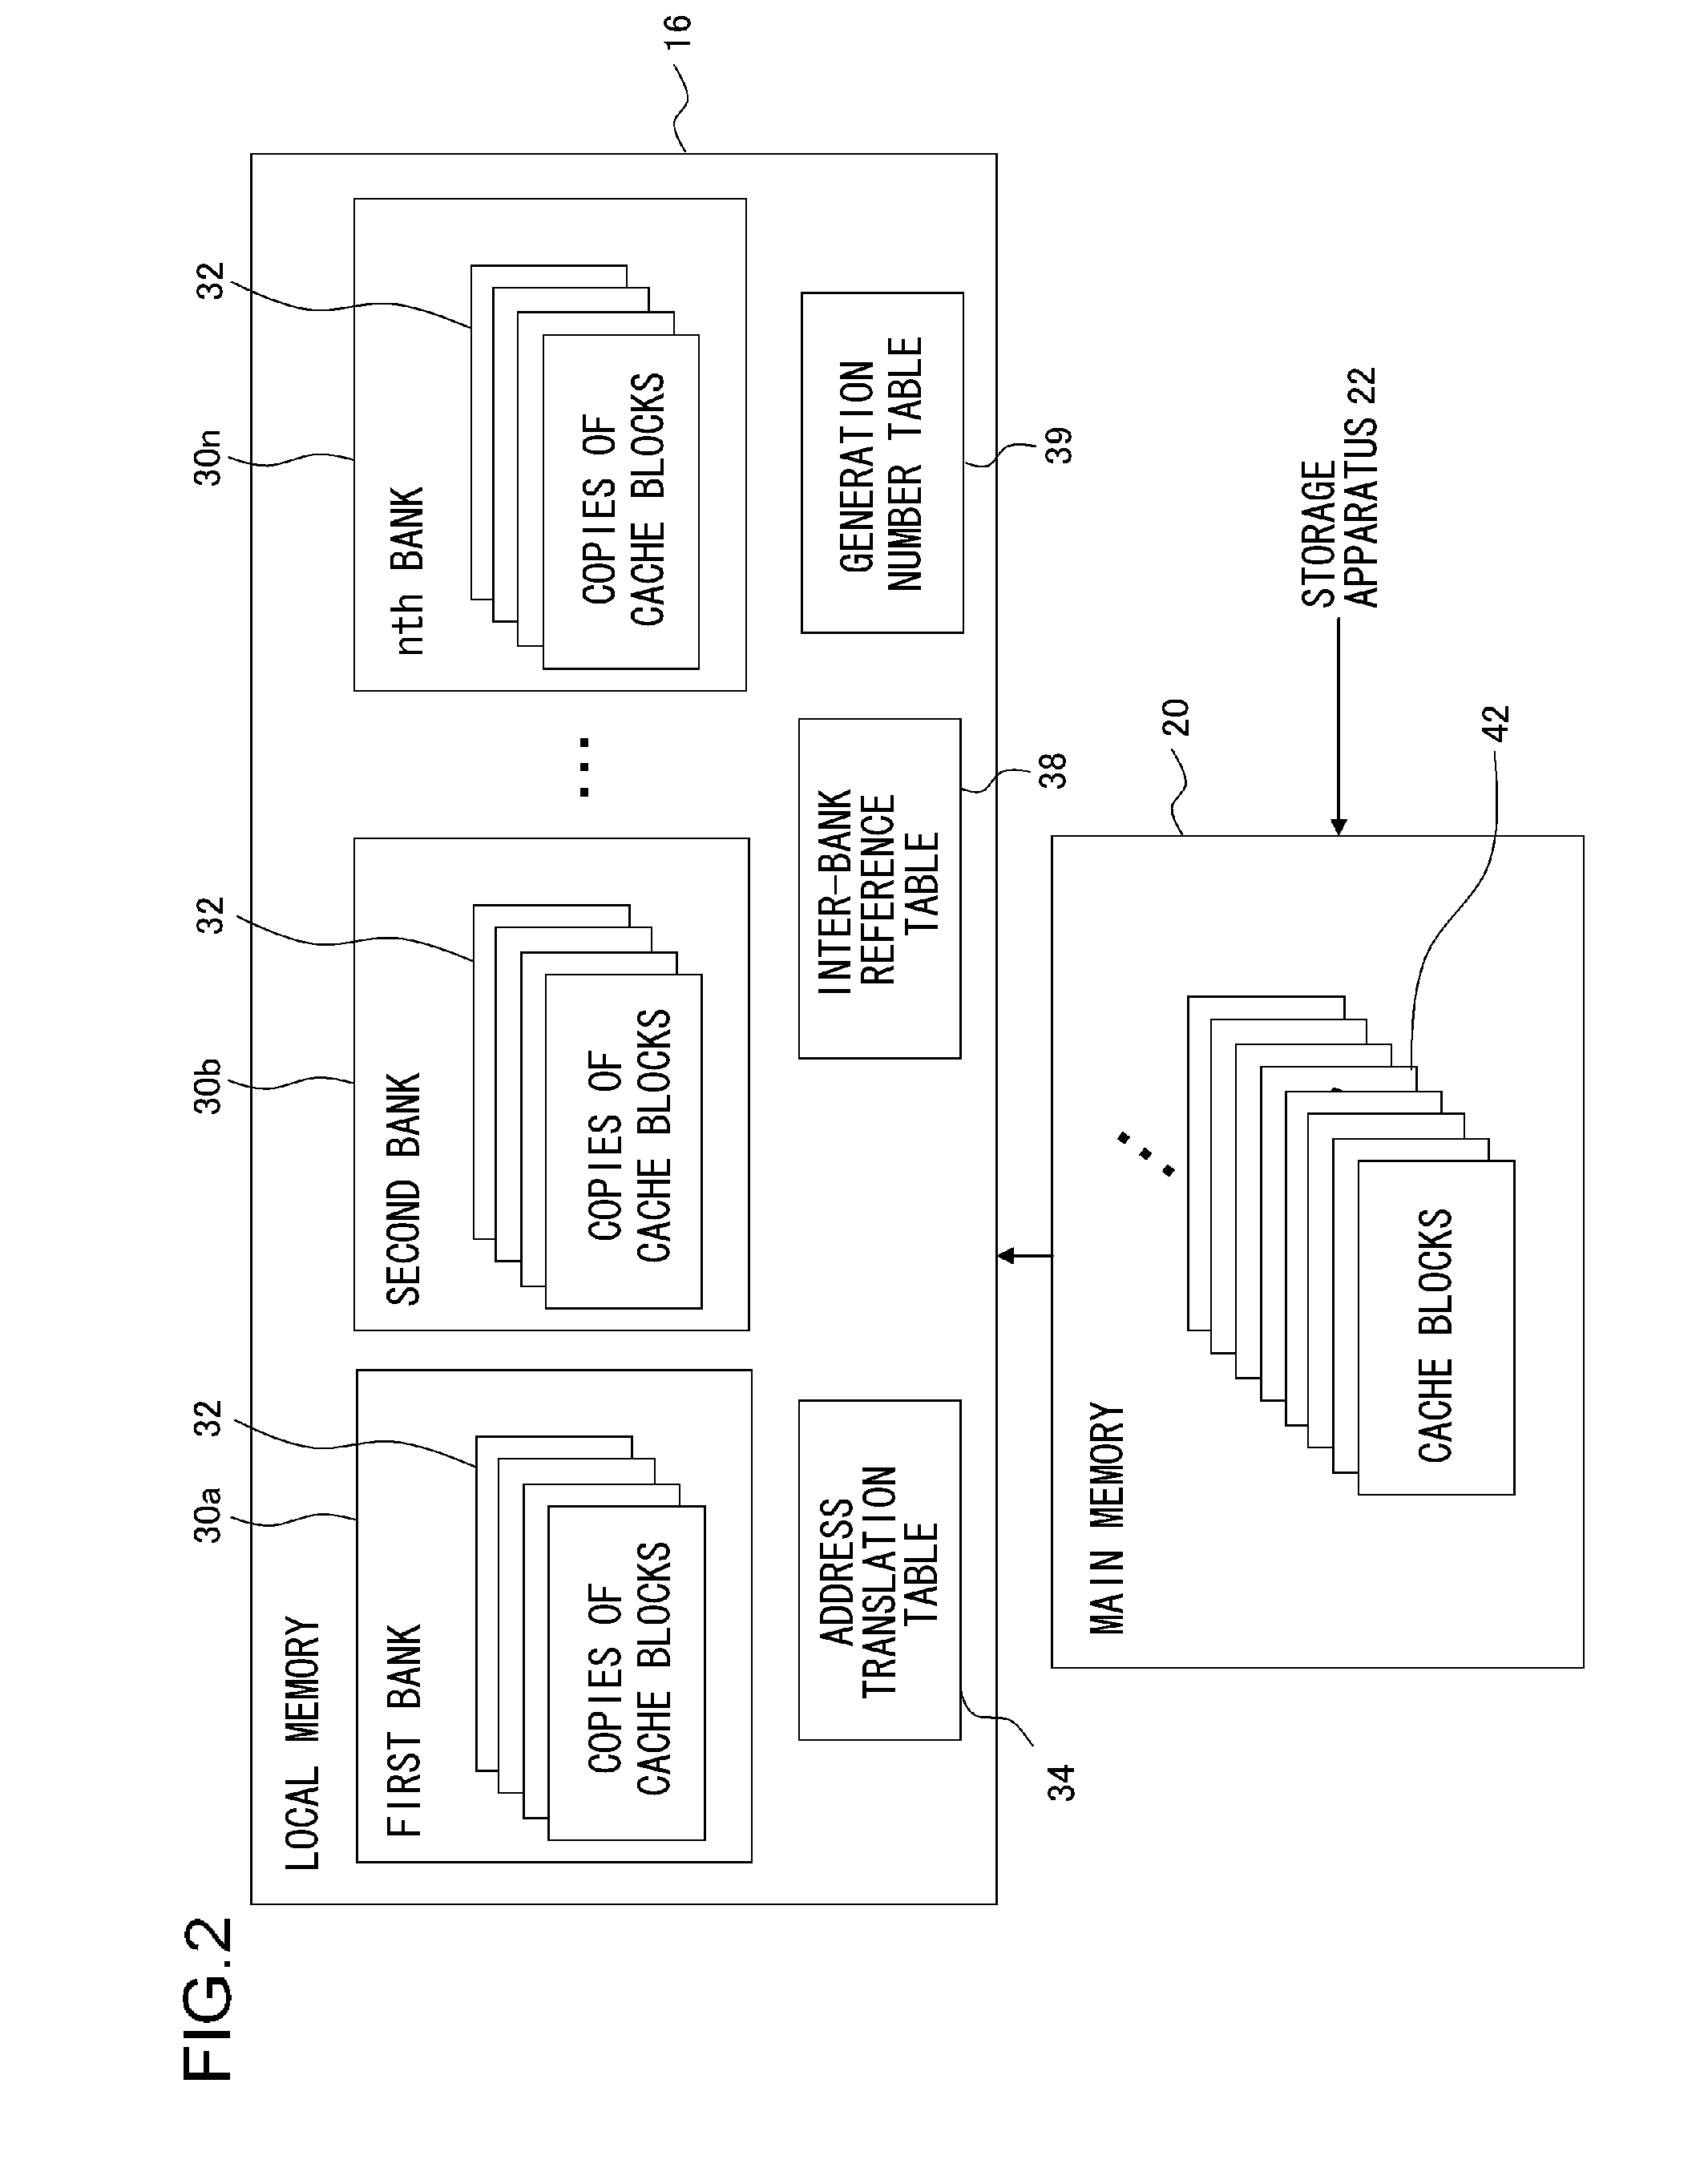 Apparatus and method for efficient caching via addition of branch into program block being processed